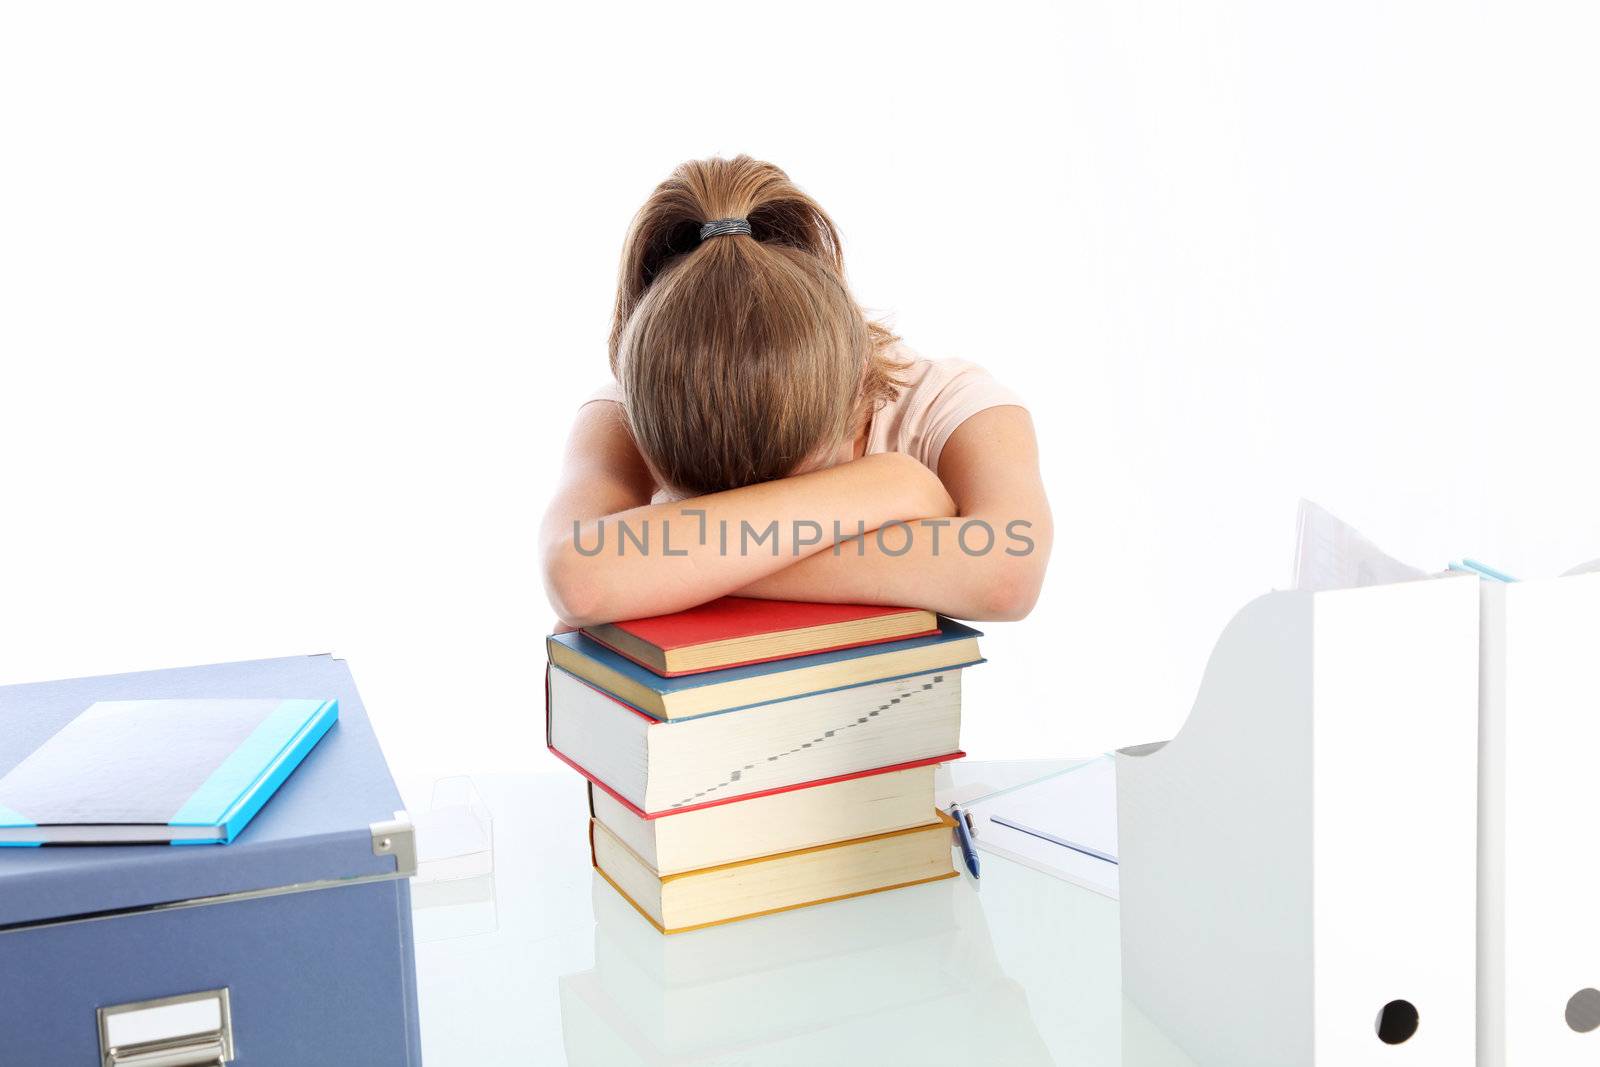 Student asleep on a pile of books  by Farina6000